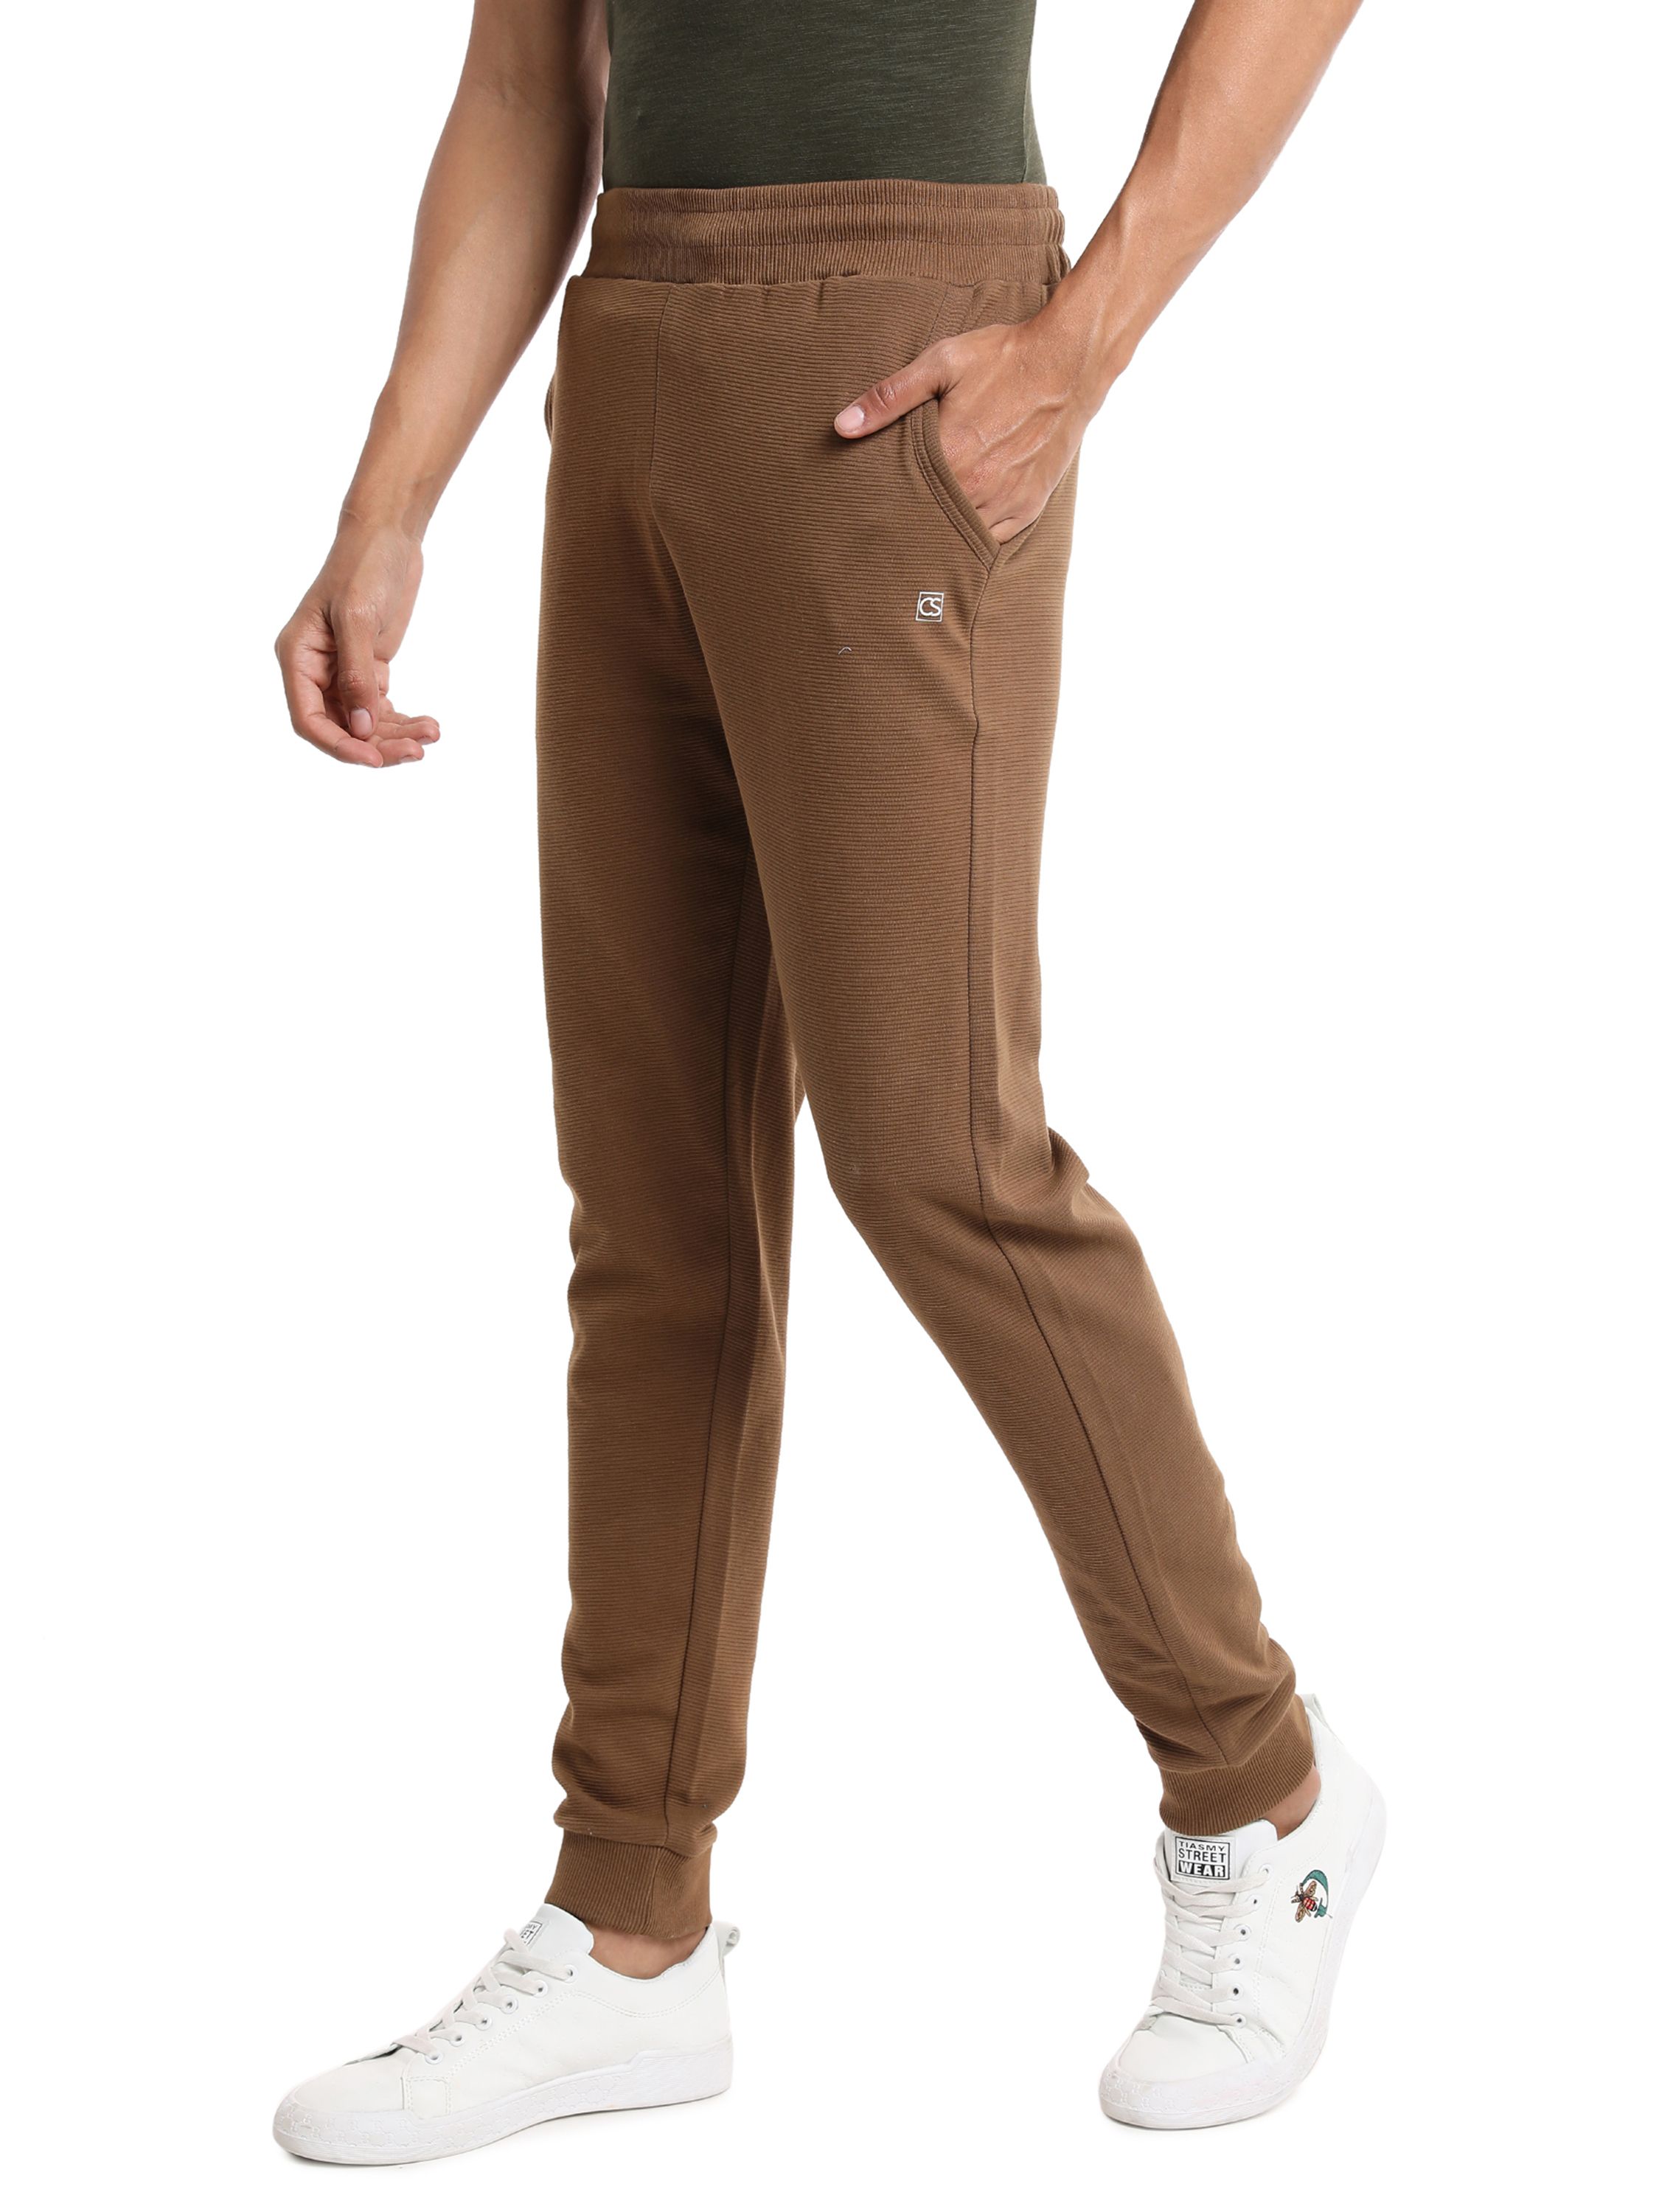 Evening & Sports Trackpant For Men